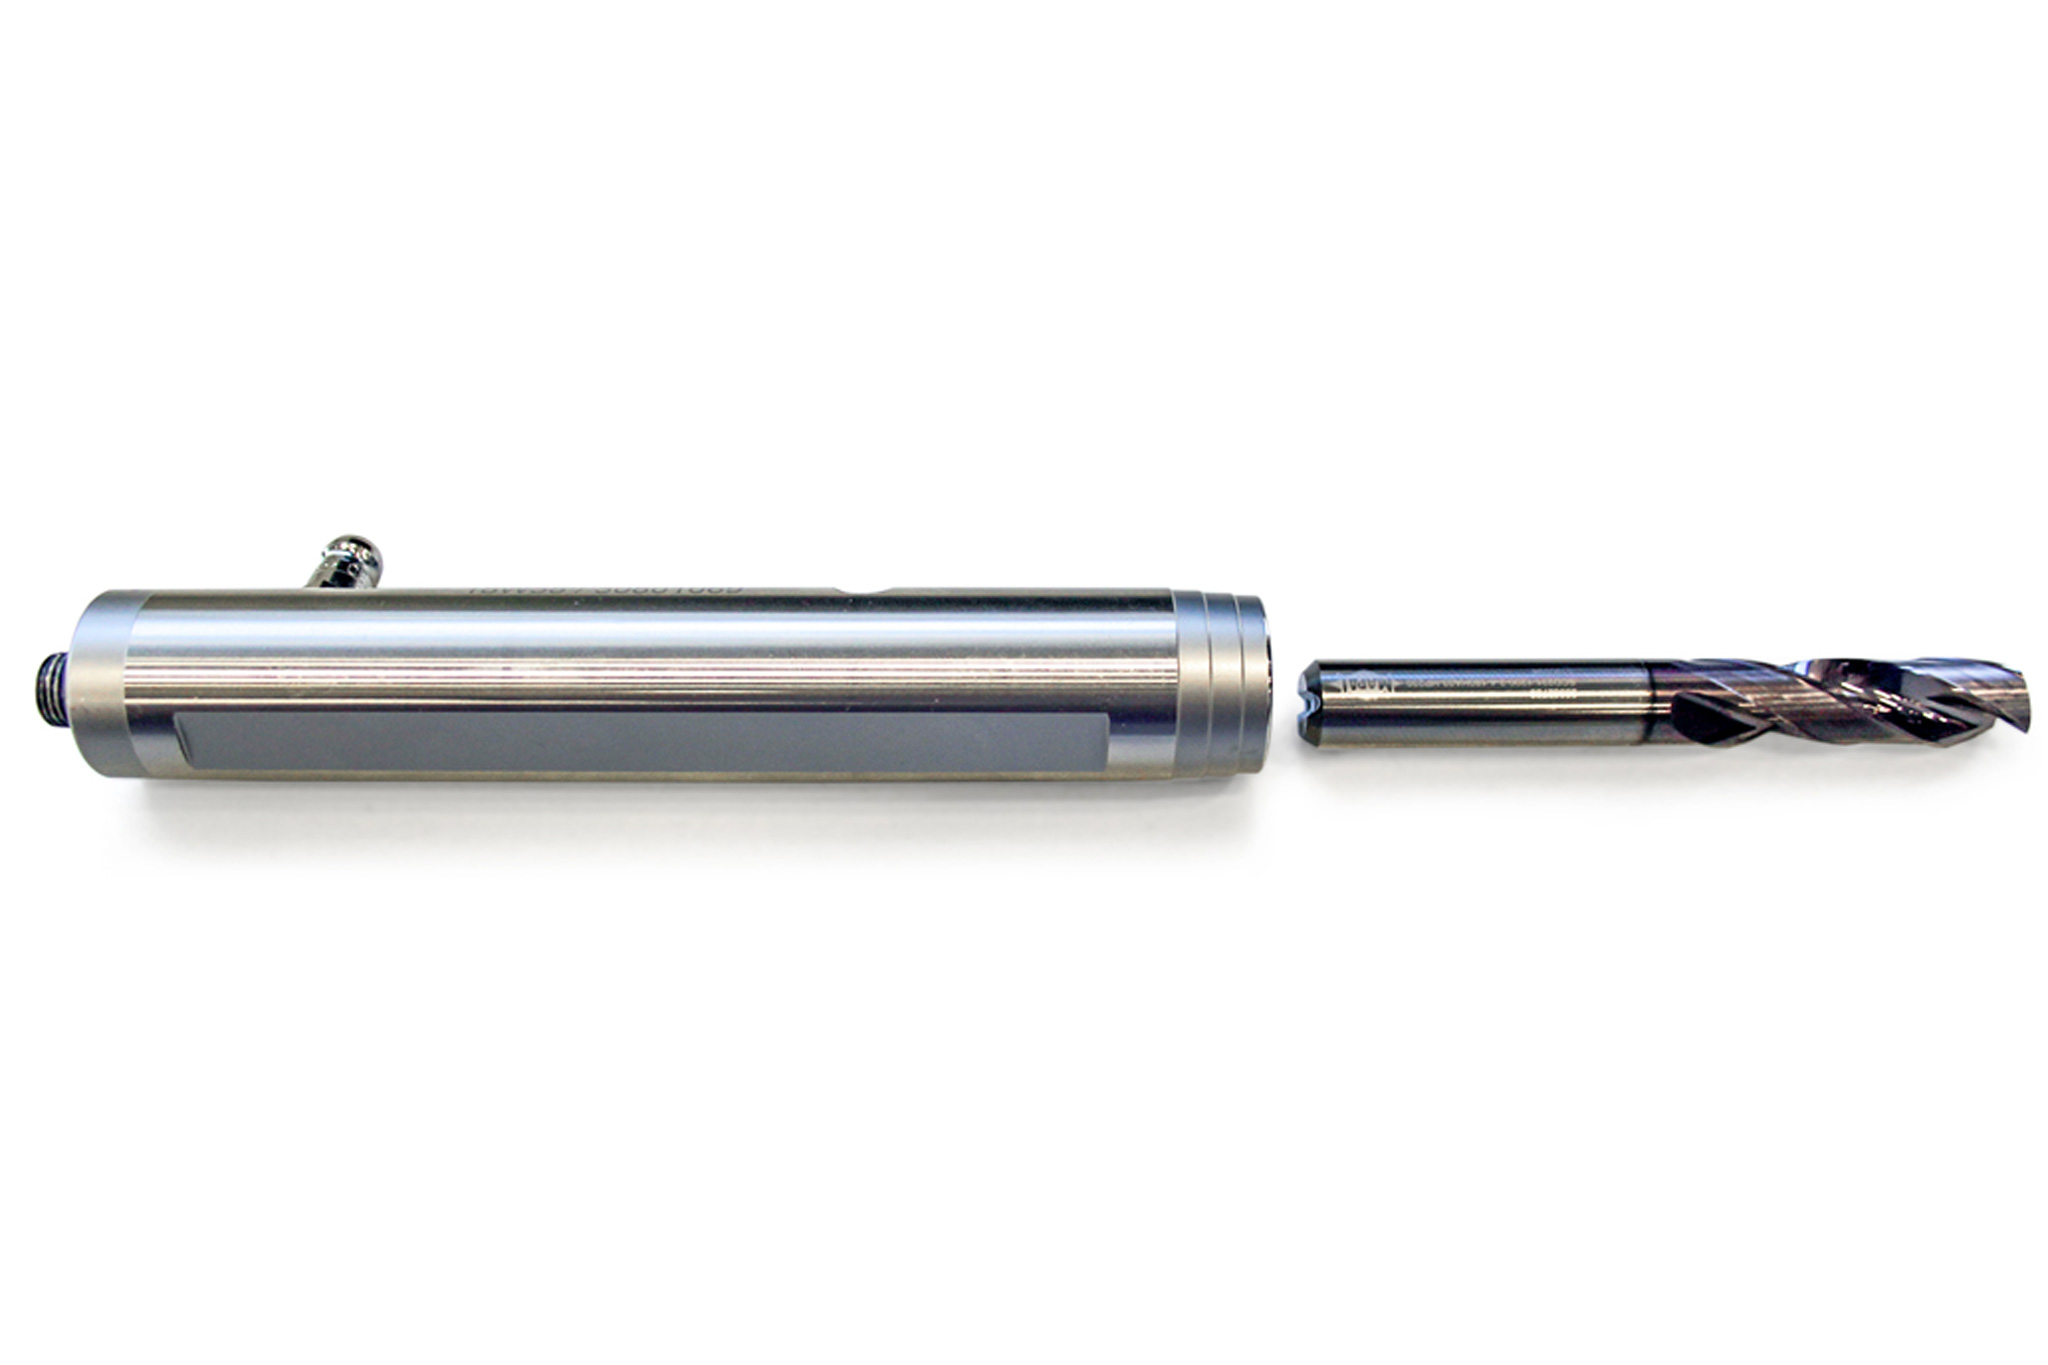 A drilling tool is positioned in front of the special hydraulic chuck from MAPAL.